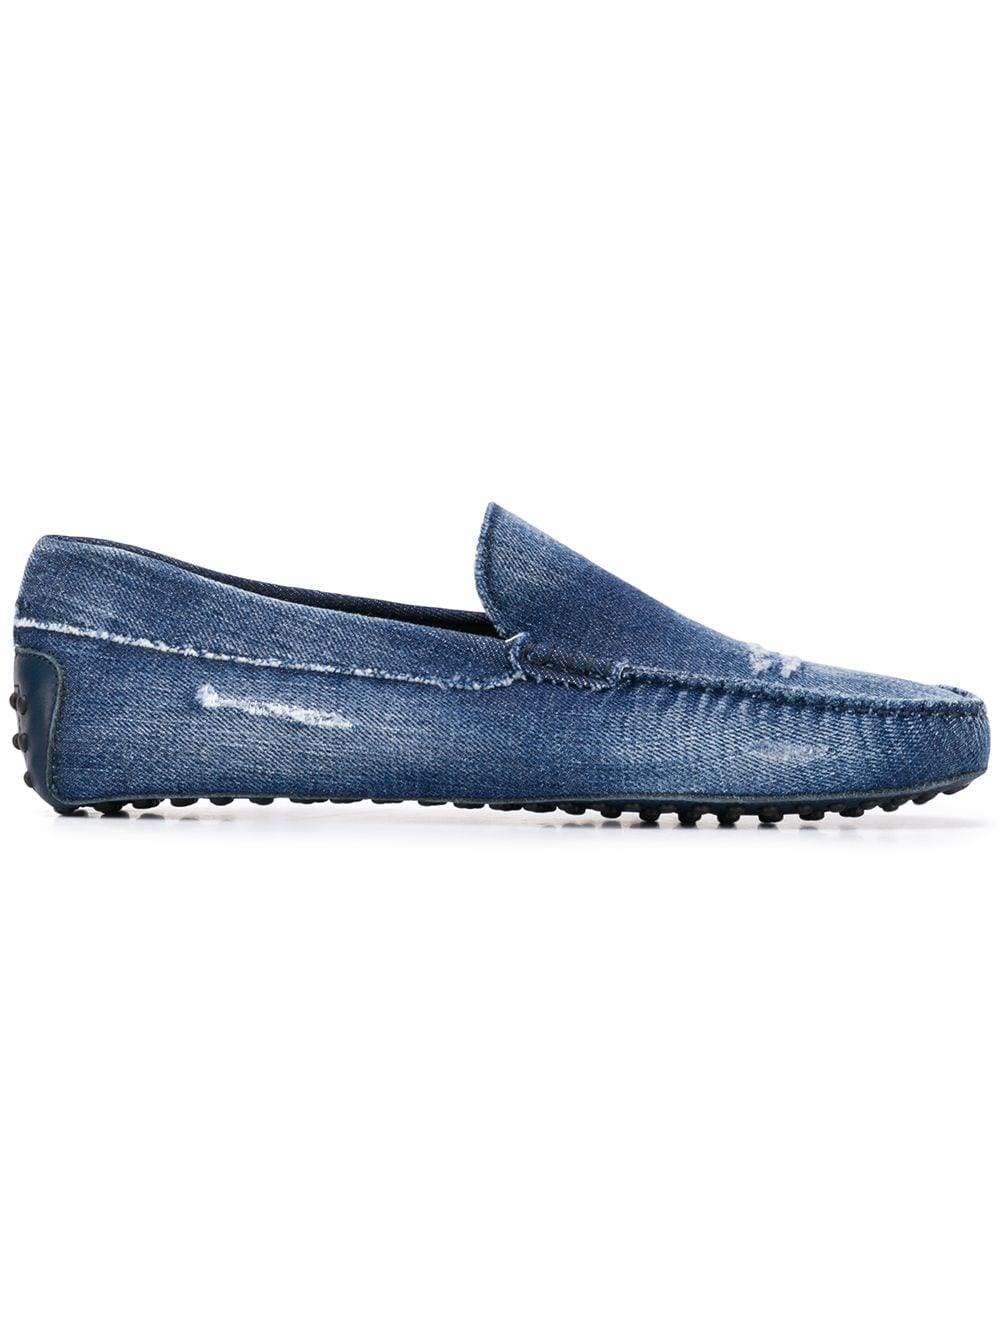 tods denim loafers